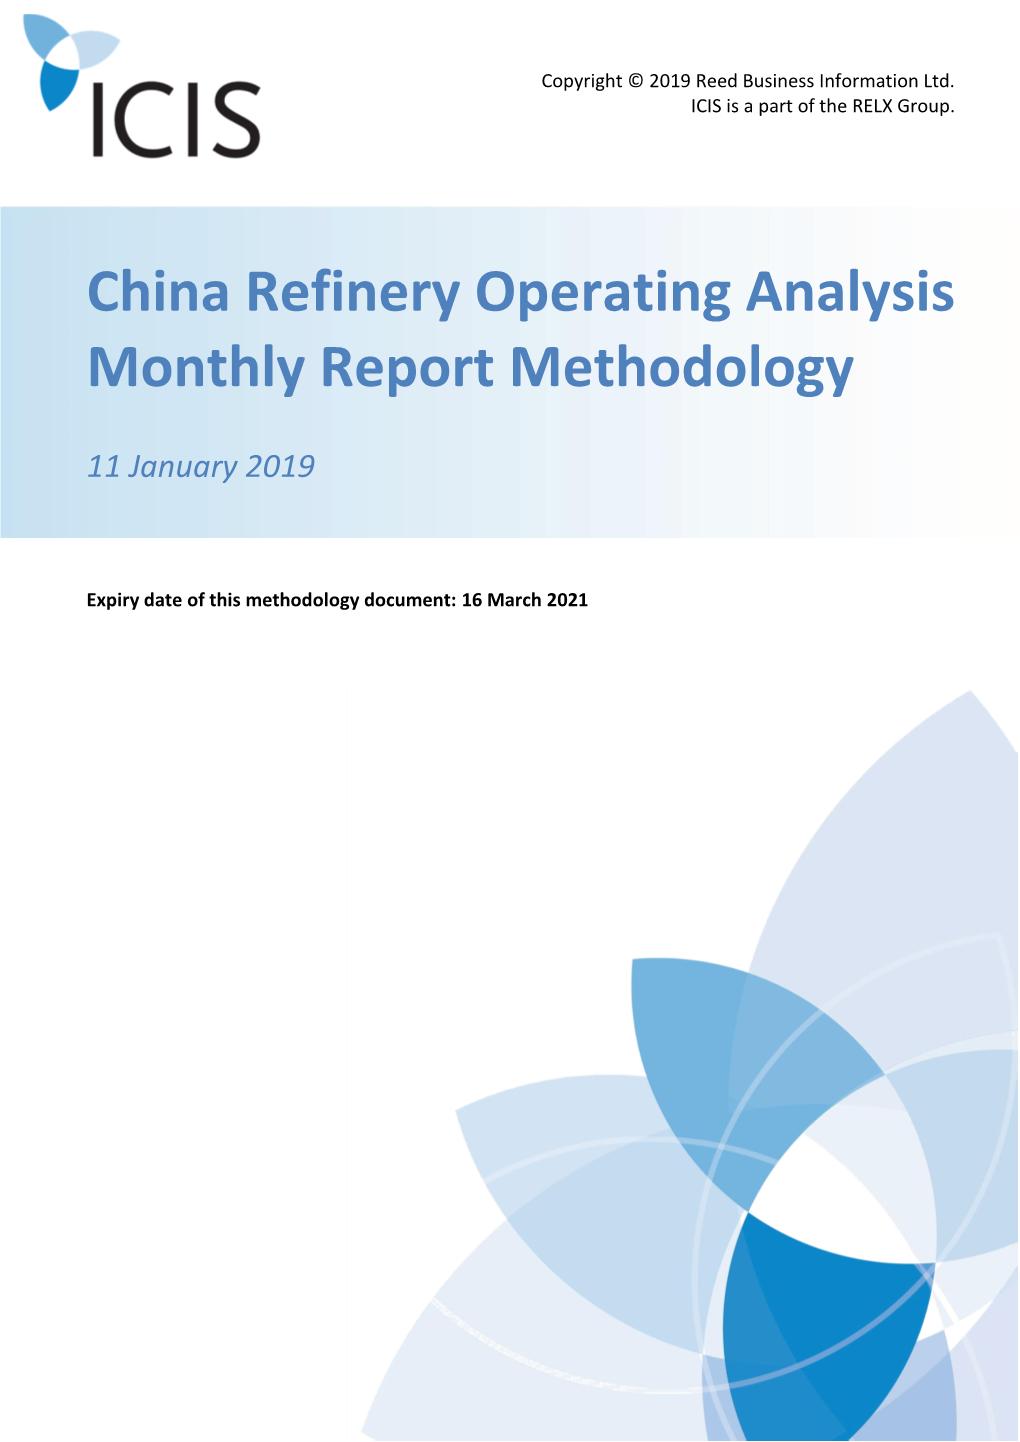 China Refinery Operating Analysis Monthly Report Methodology